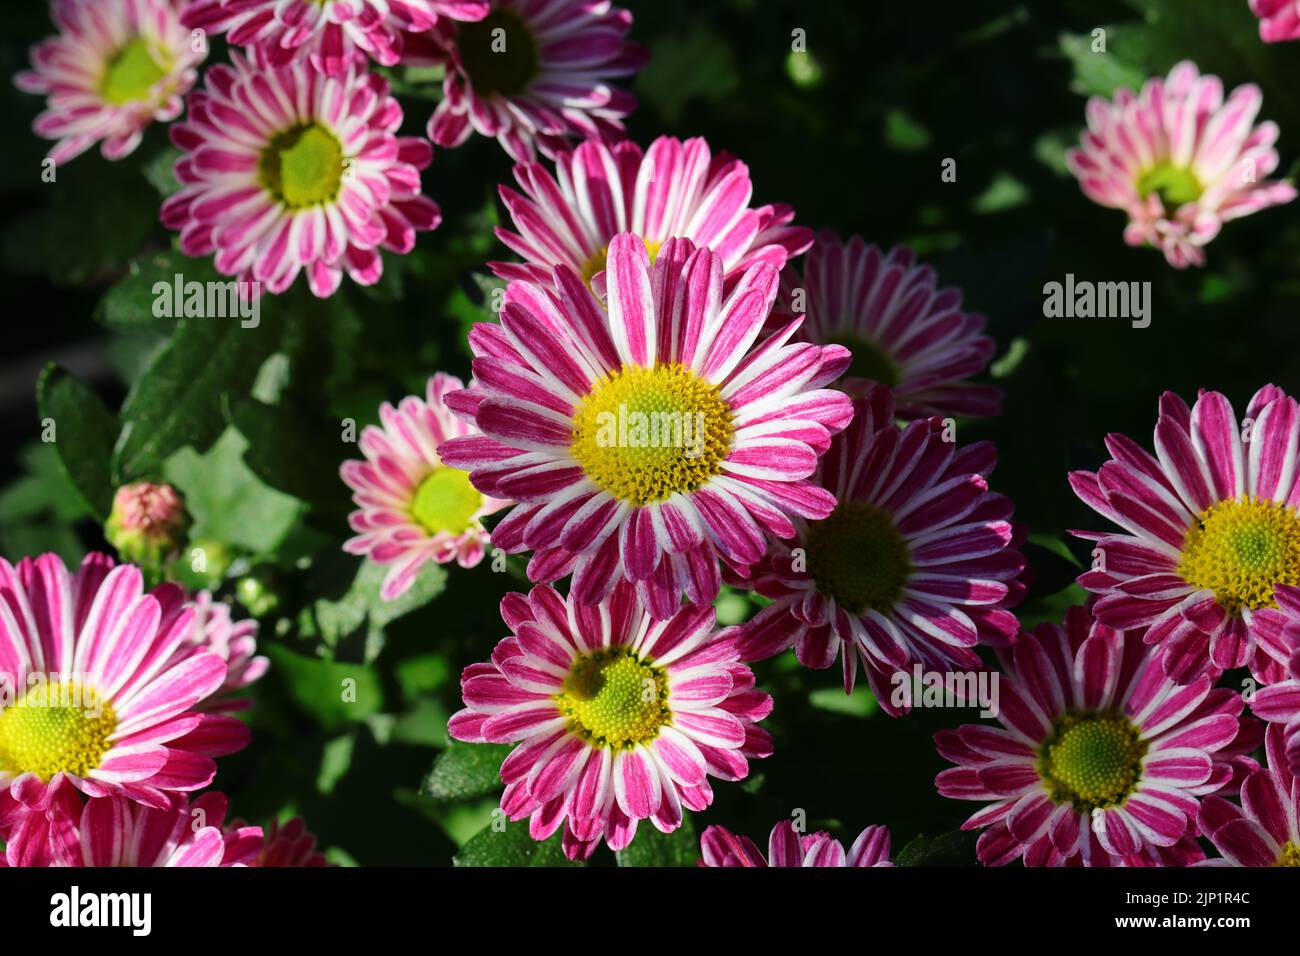 close-up of beautiful pink white chrysanthemum flowers, view from above Stock Photo